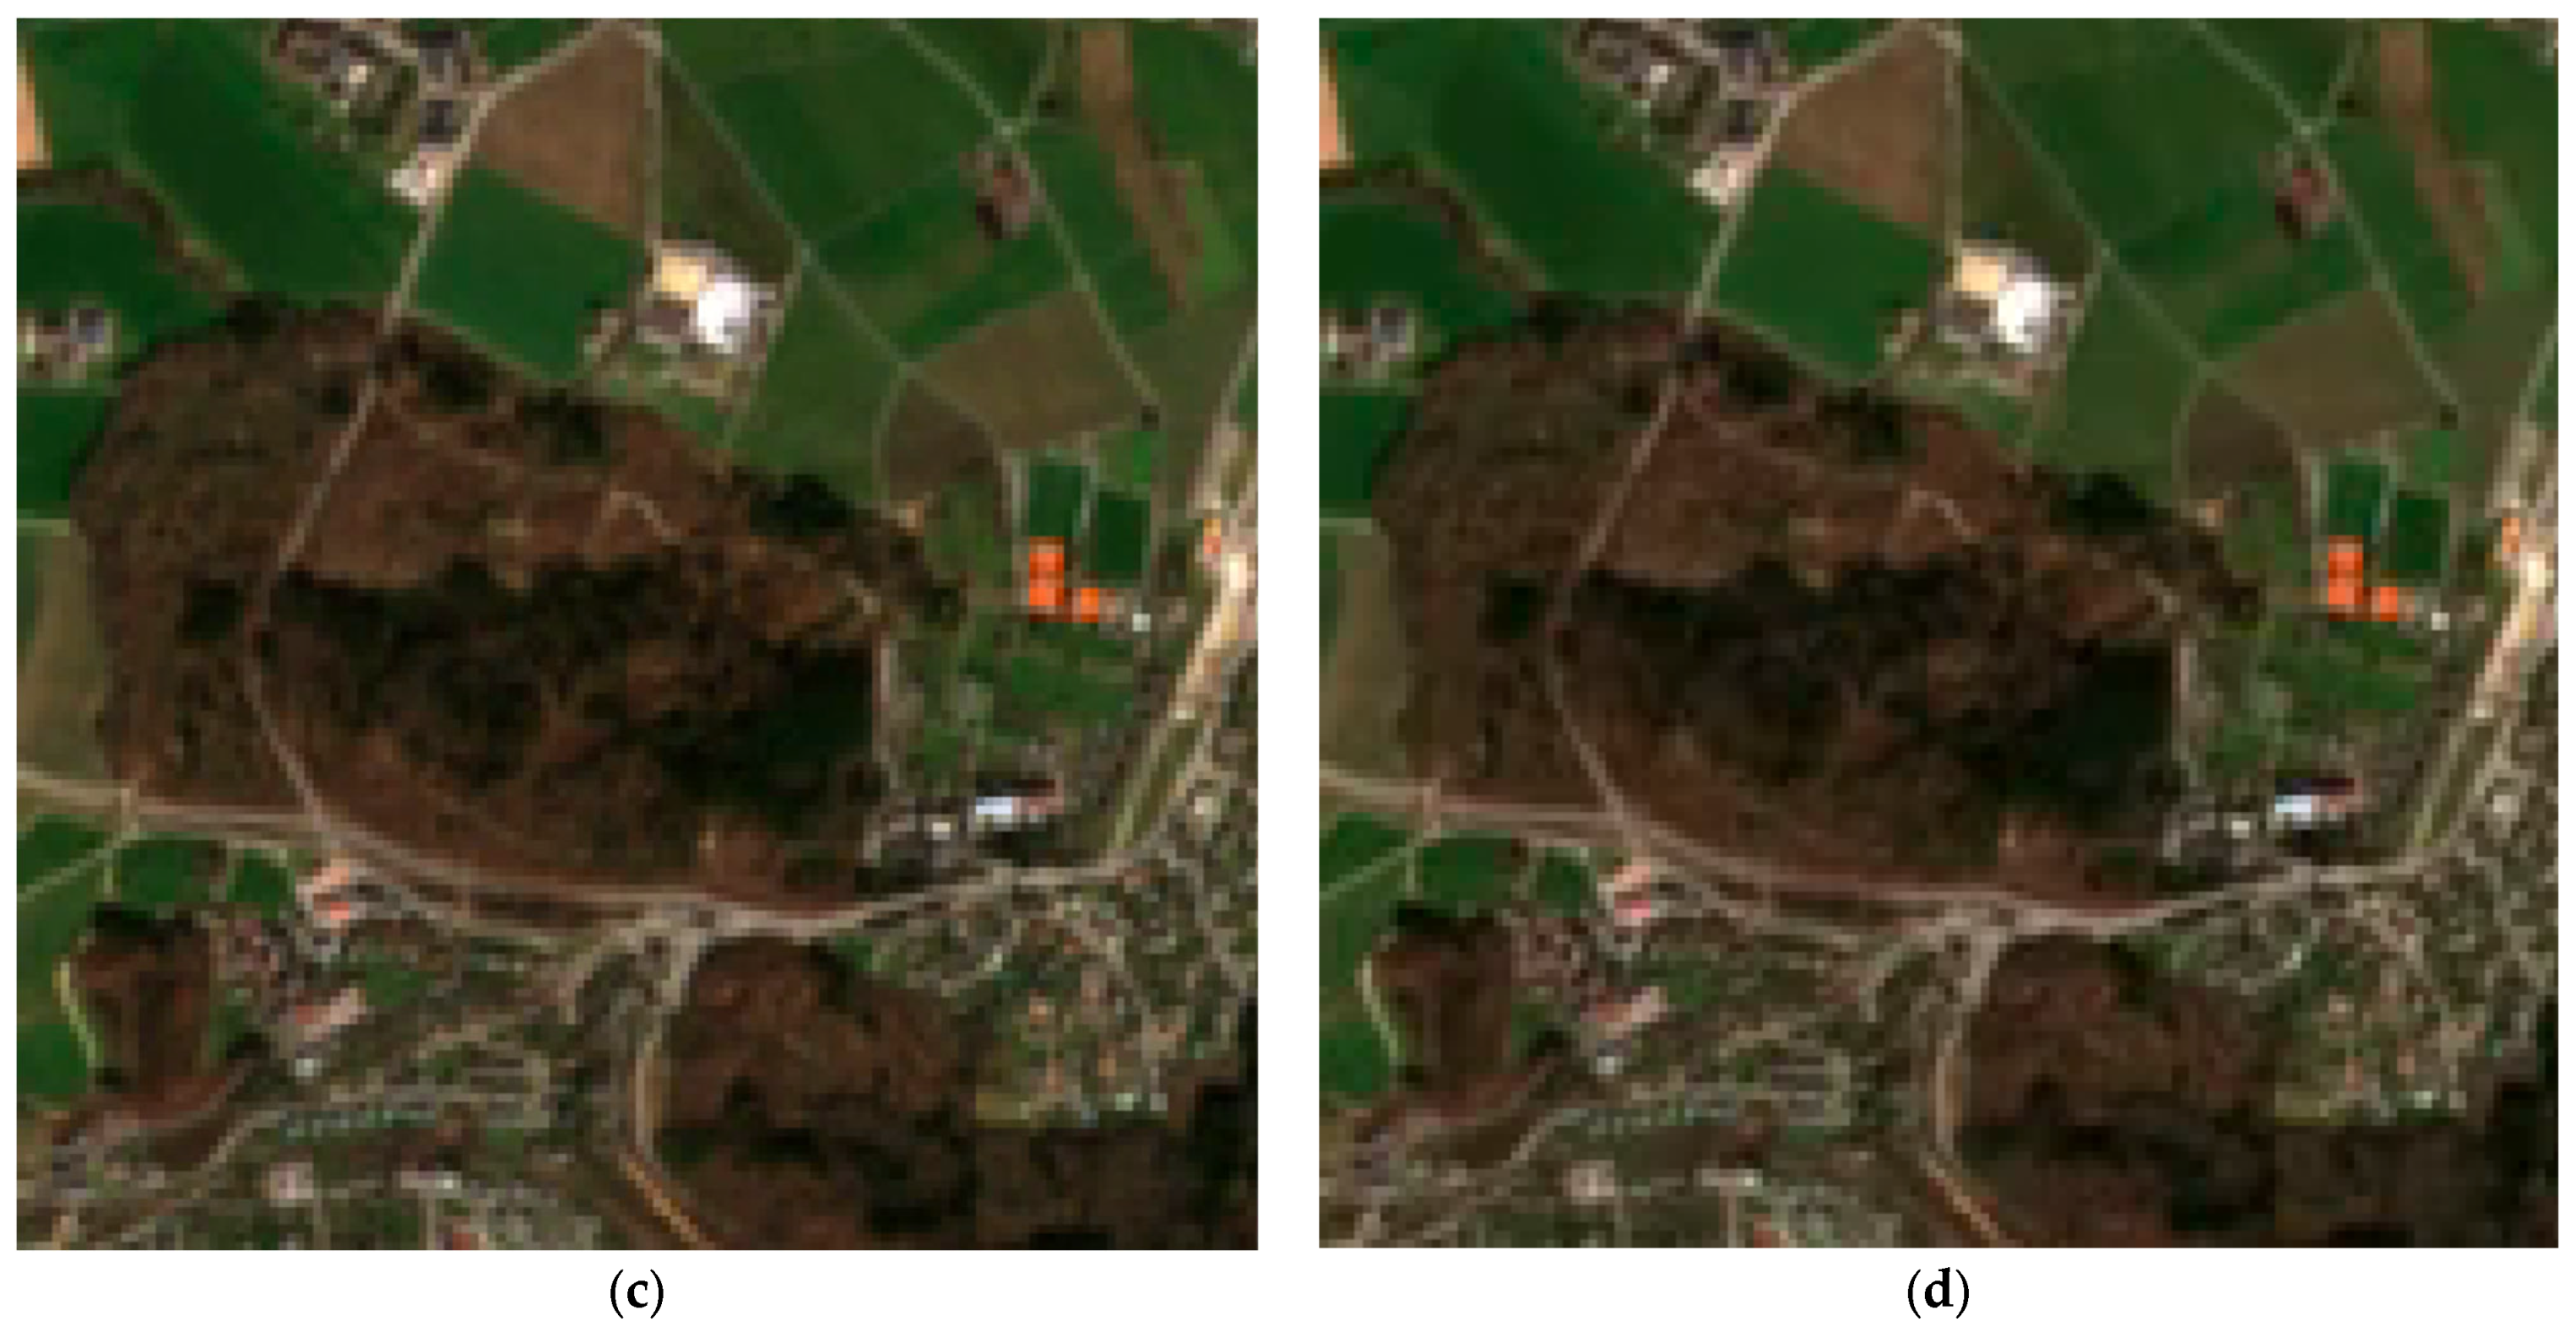 Comparison between eGIS Data and Google Earth Pro Estimation for